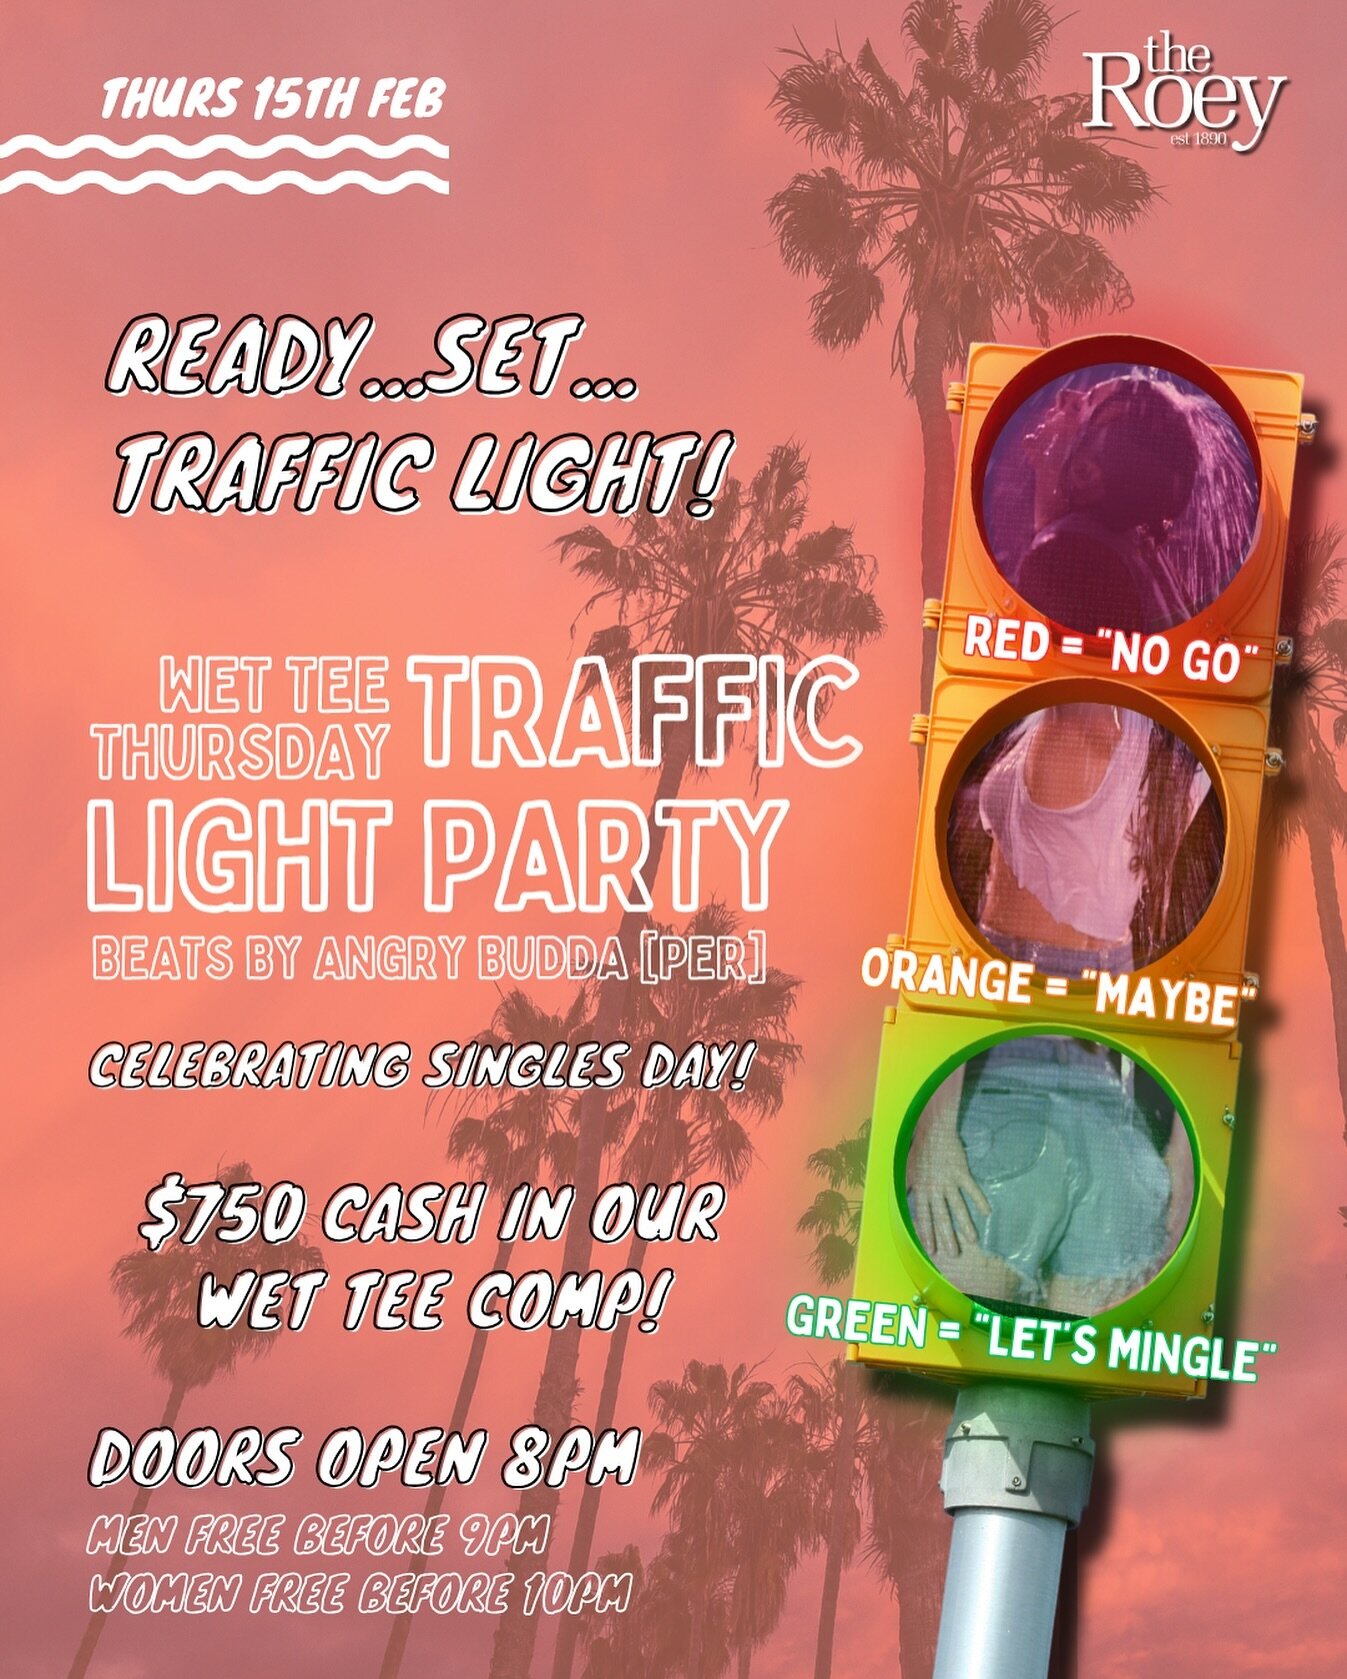 Ready... Set... TRAFFIC LIGHT 🚦❤️&zwj;🔥

Join us for a special WET TEE THURS TONIGHT celebrating SINGLES DAY, so we&rsquo;re getting a bit cheeky with a TRAFFIC LIGHT PARTY!

Don&rsquo;t miss DJ Angry Buda as he mixes up you sexy Red Light, Green L